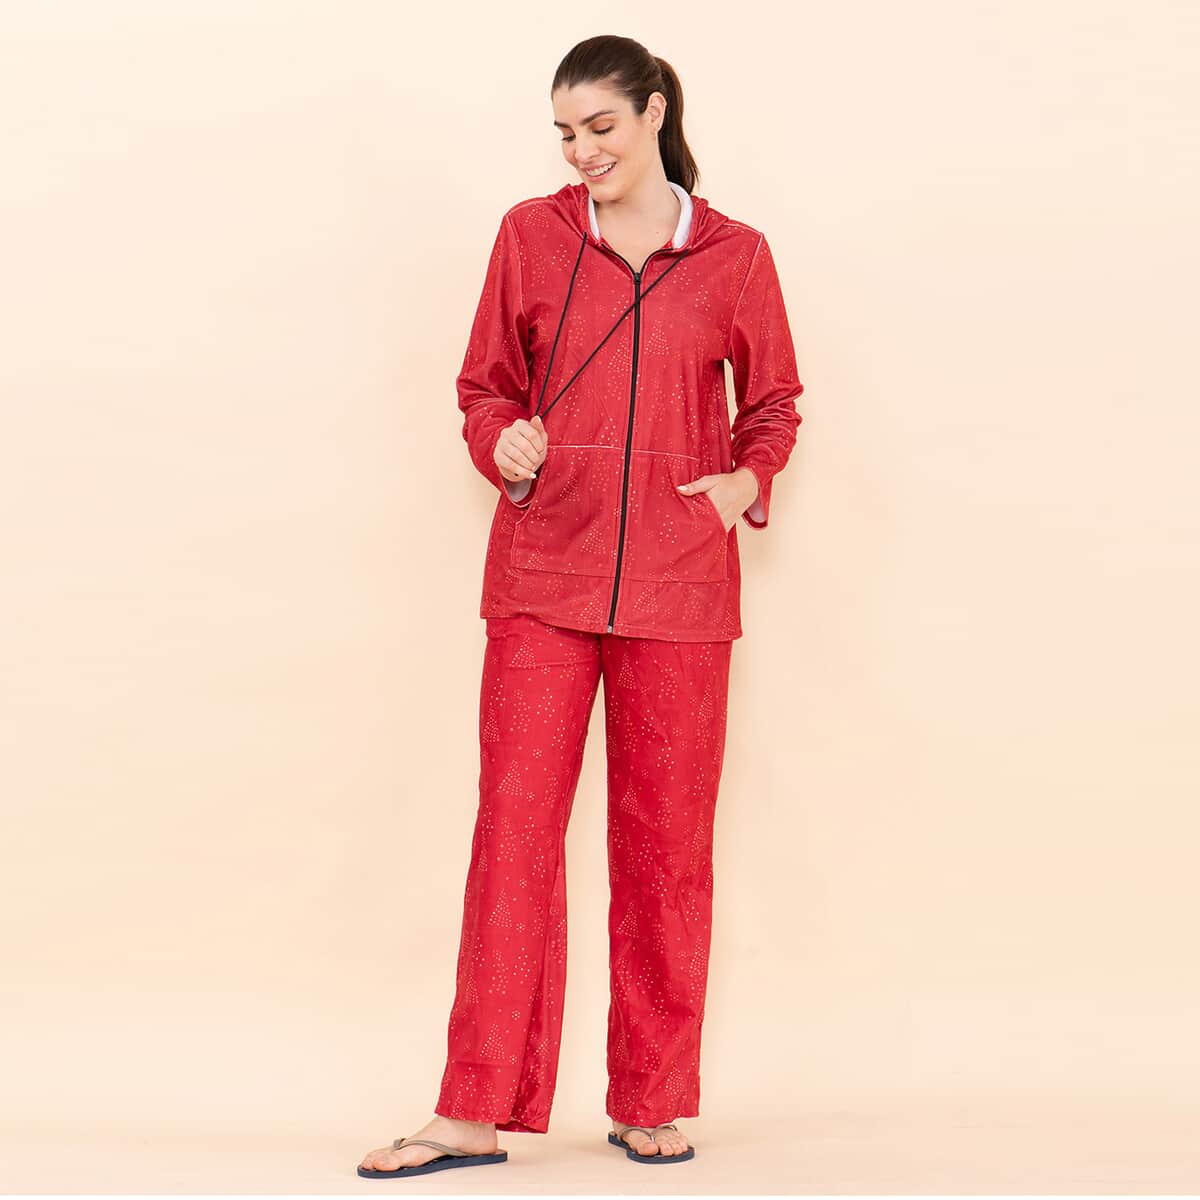 Tamsy Red Sparkle Printed Brushed Flannel Lounge Wear Set- 2X image number 2